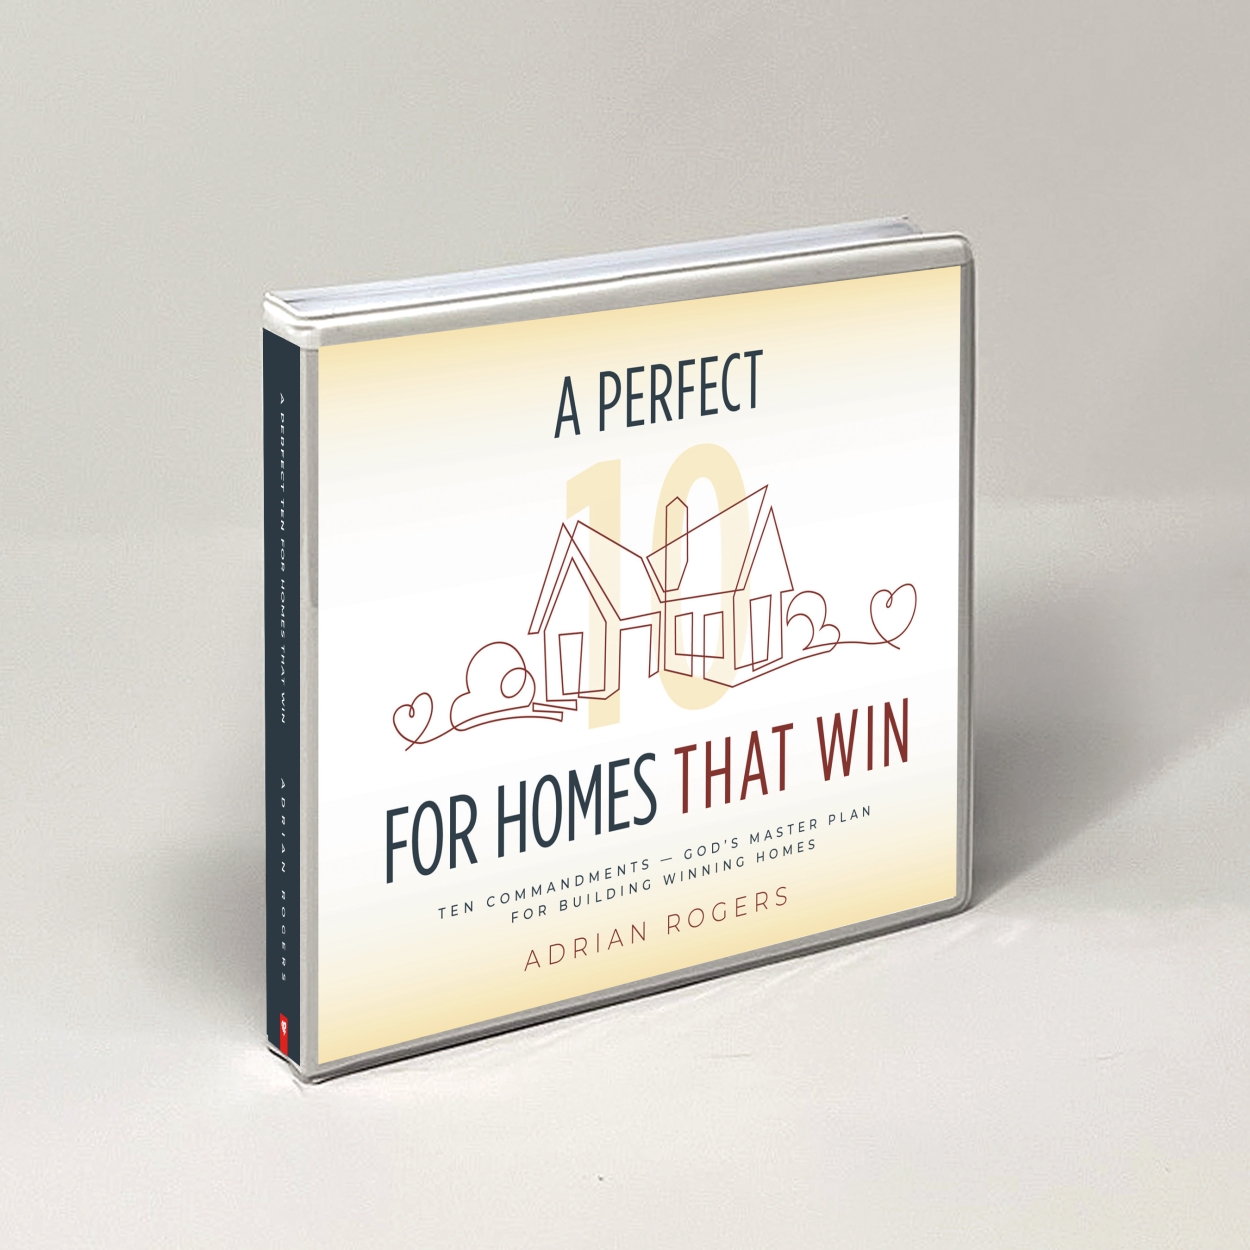 Cda142Lg A Perfect 10 for Homes that Win Series